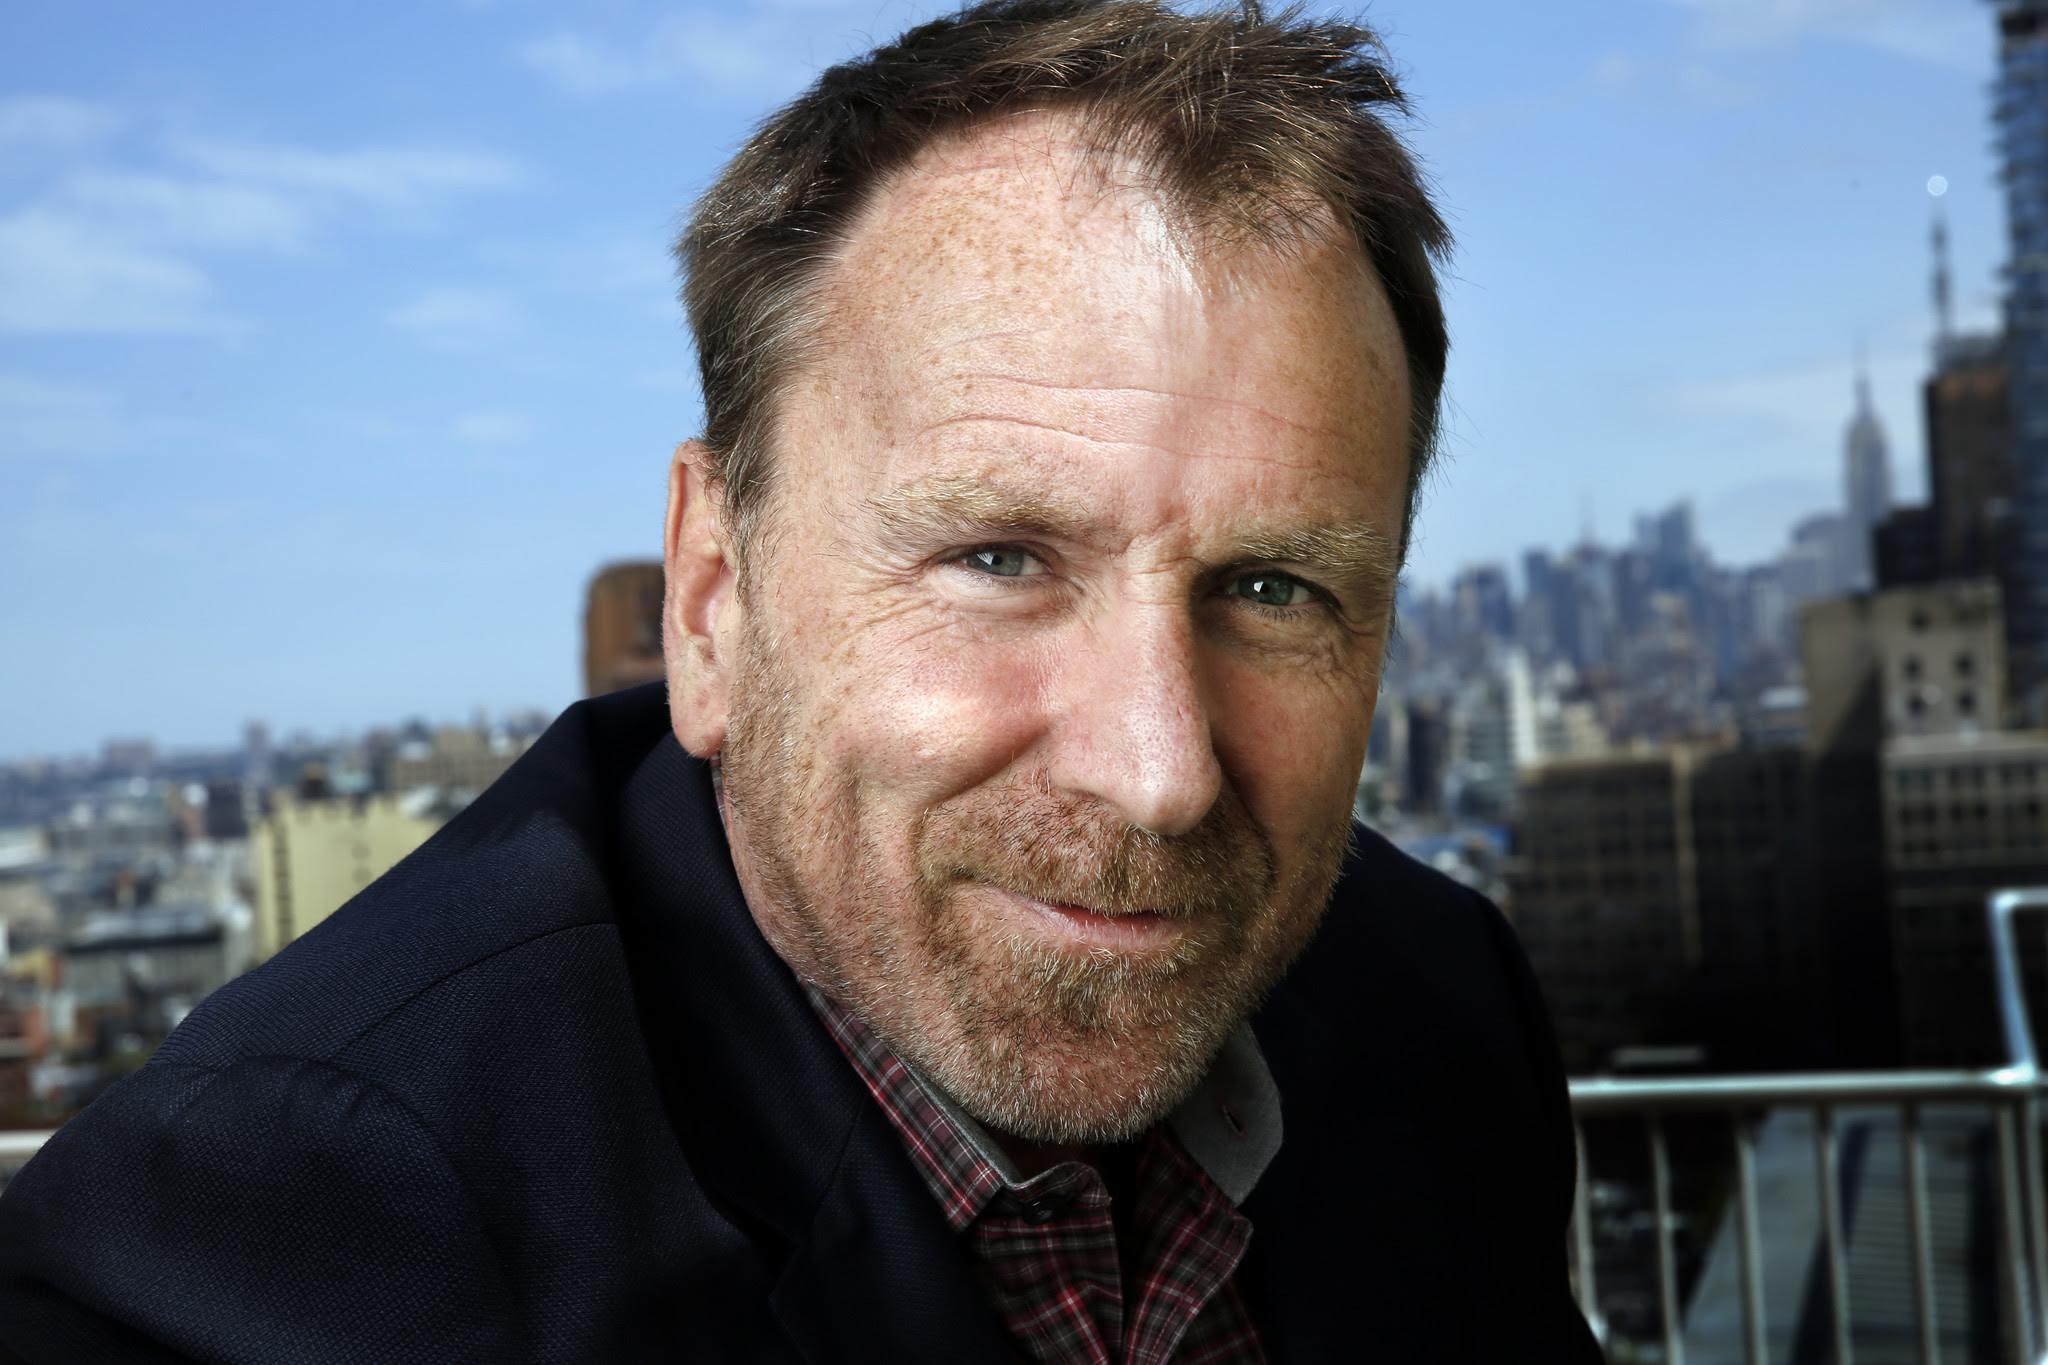 colin quinn comedy special pandemic